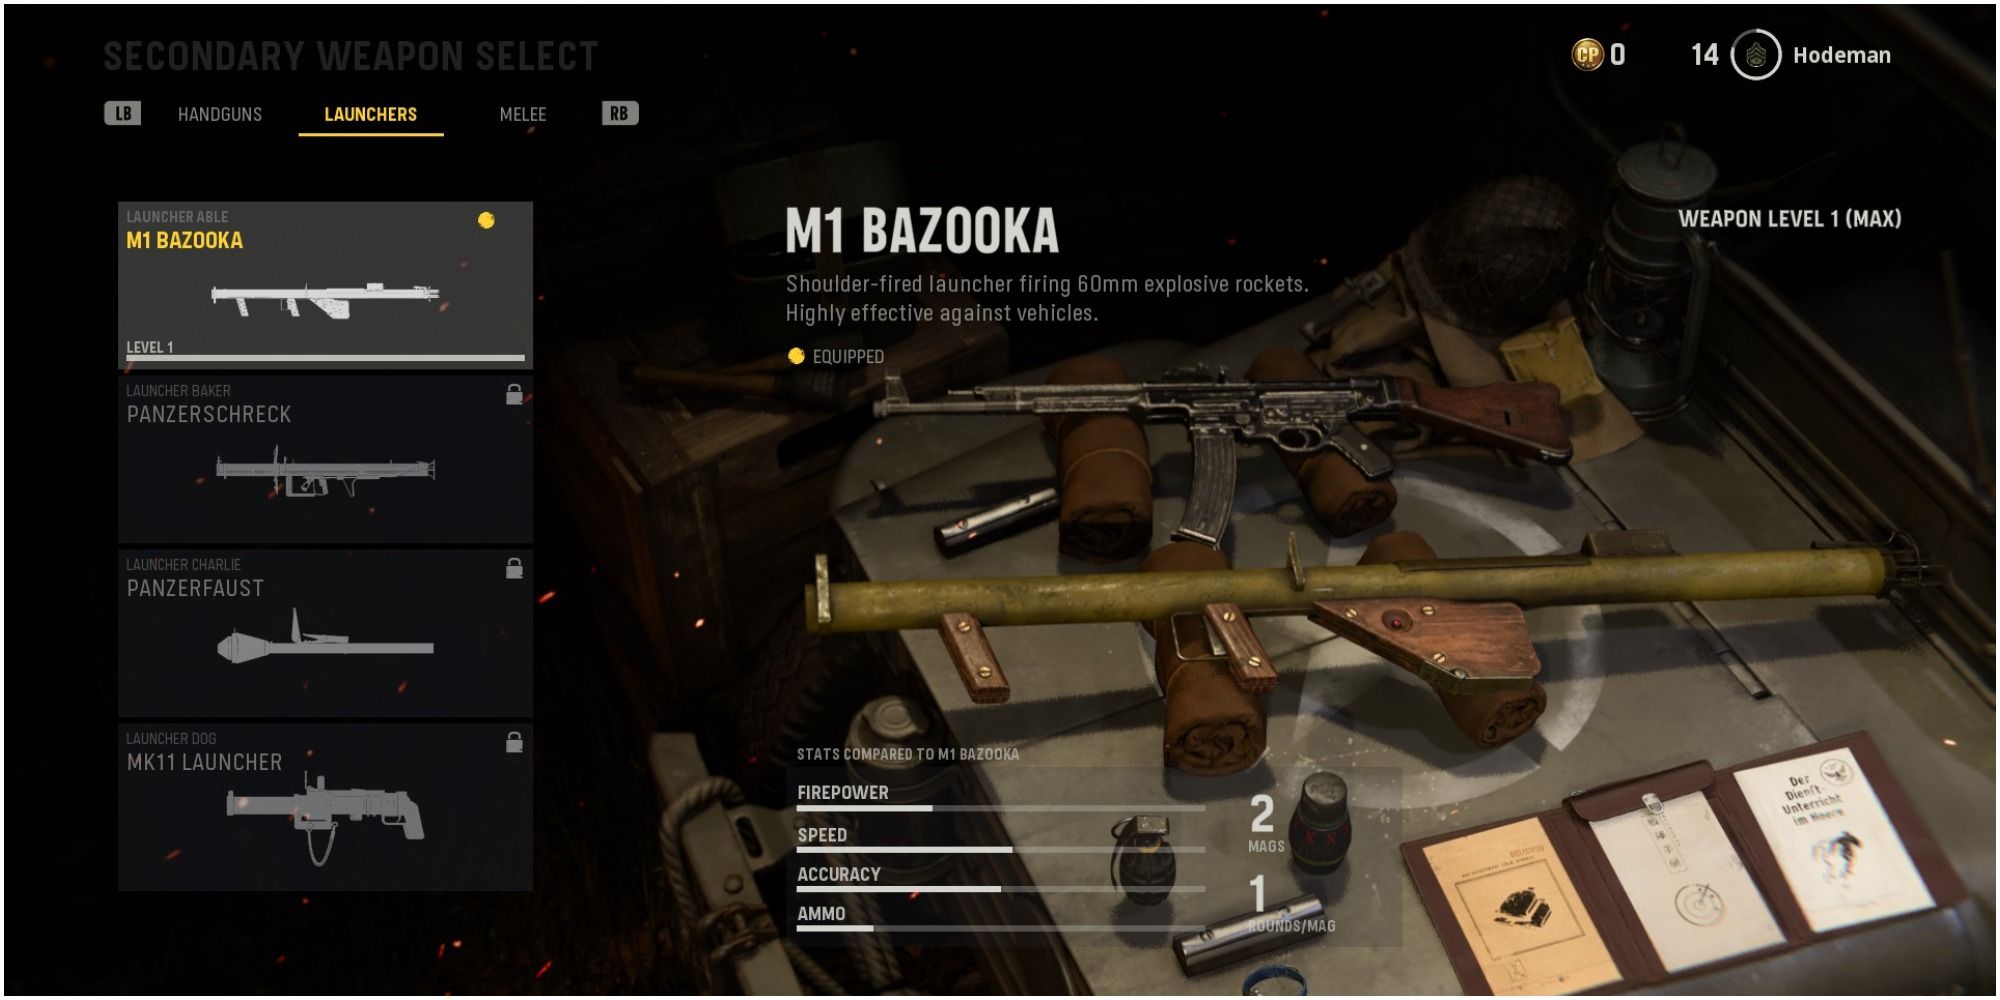 Call Of Duty Vanguard Looking At The M1 Bazooka Secondary Weapon